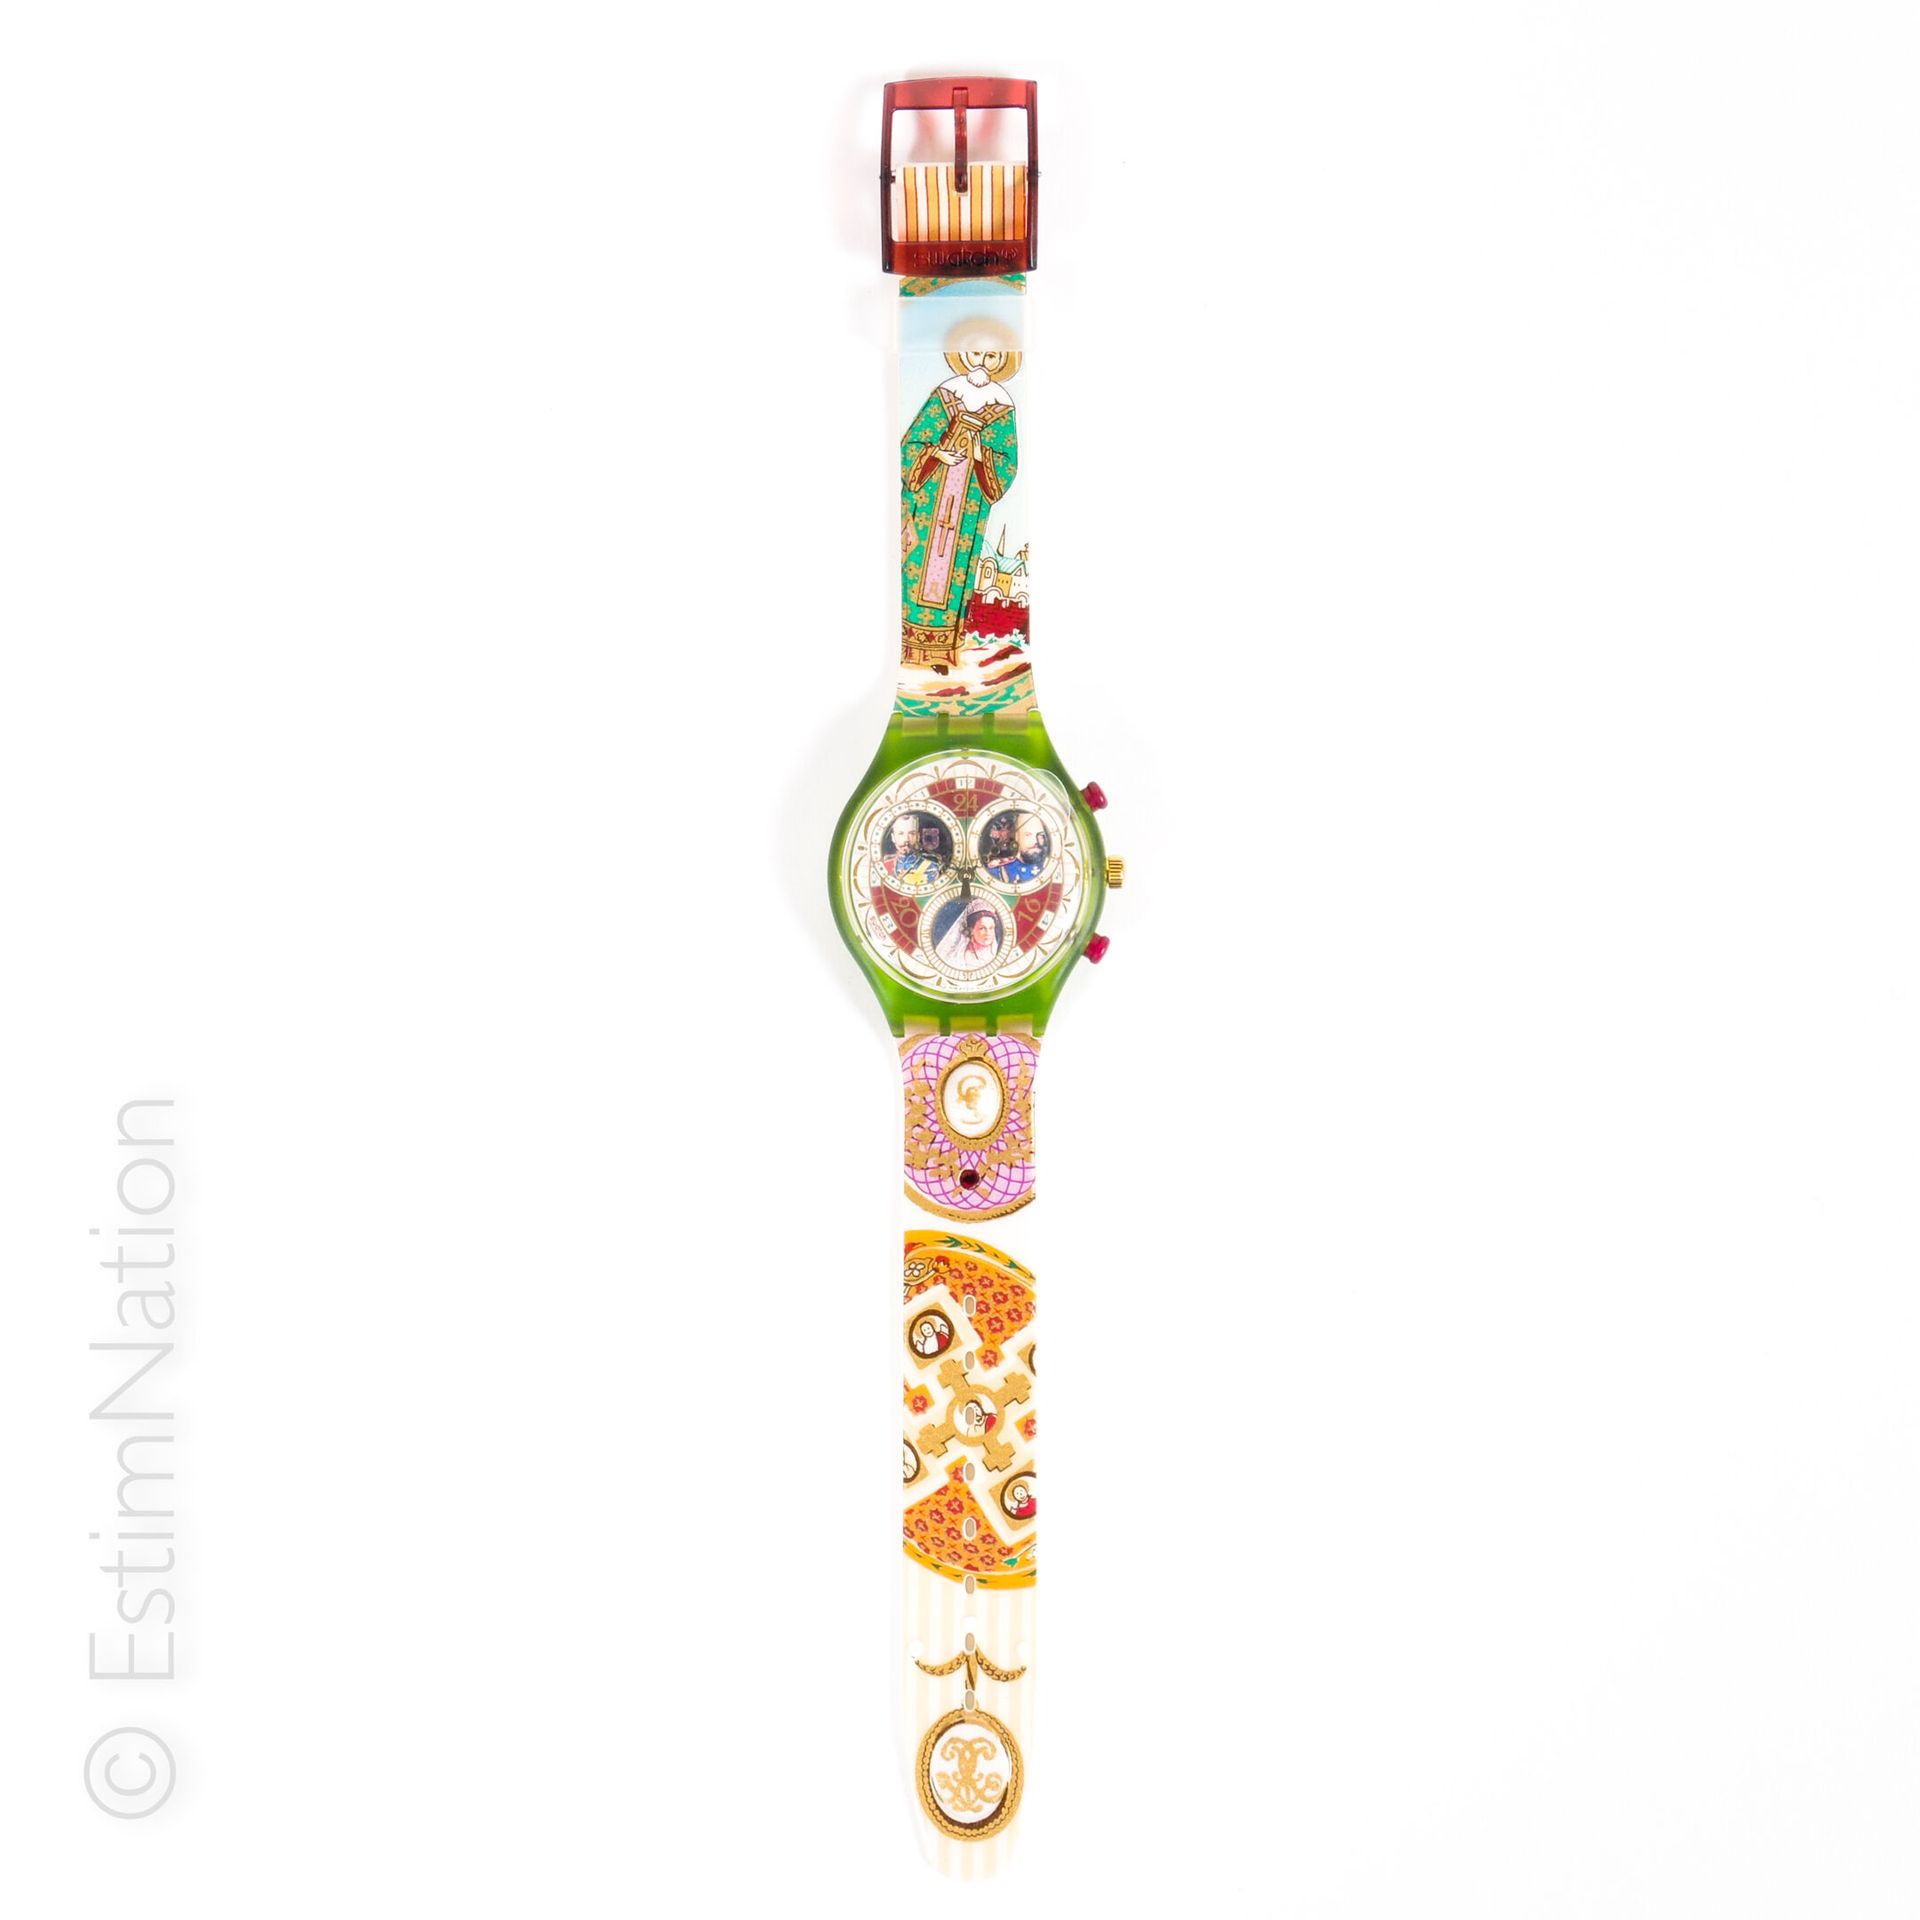 SWATCH - RUSSIAN TREASURY - 1995 SWATCH - RUSSIAN TREASURY

Plastic Collection :&hellip;